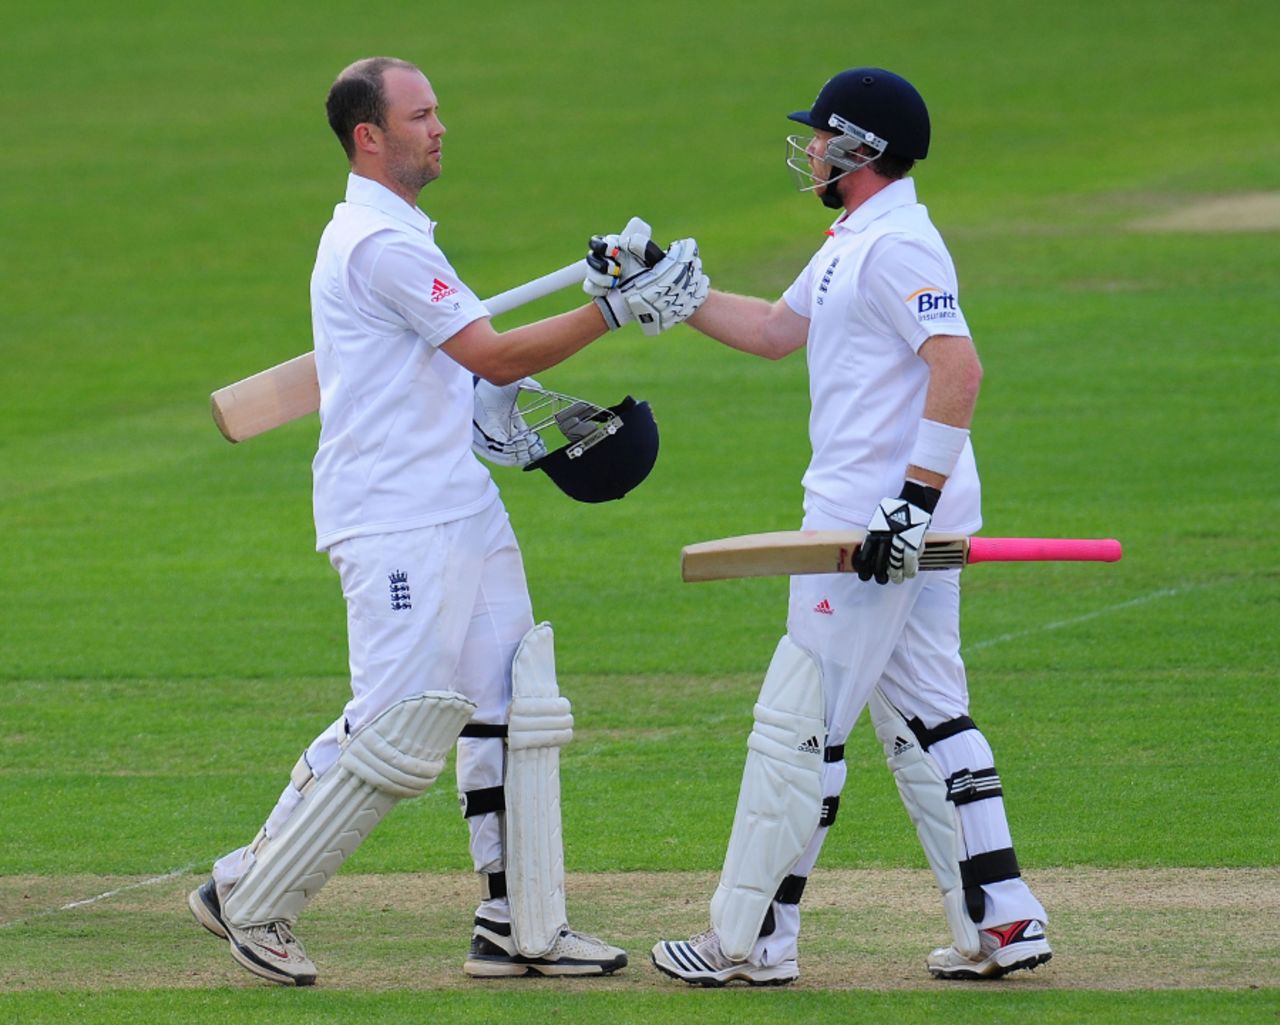 Jonathan Trott and Ian Bell put on 160 for the fifth wicket against Sri Lanka, England v Sri Lanka, 1st Test, Cardiff, 4th day, May 29, 2011